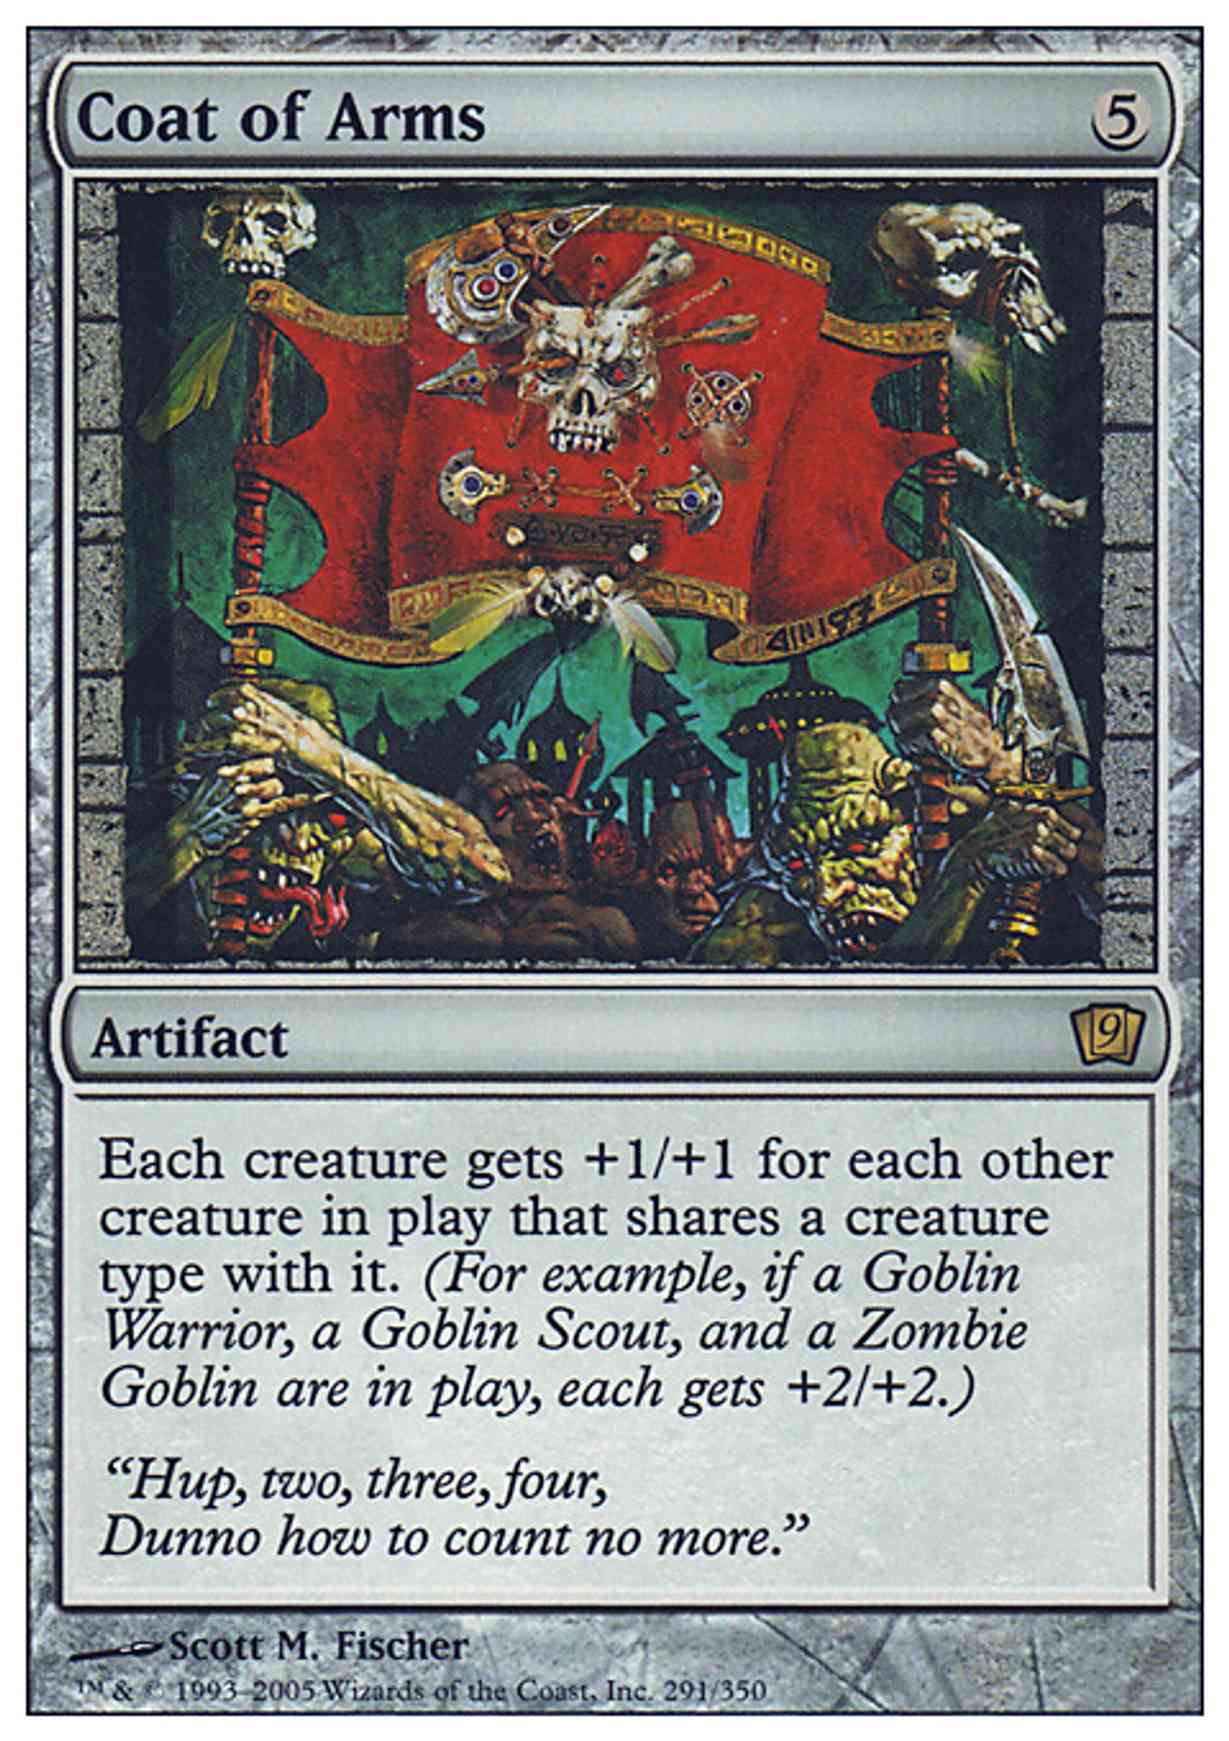 Coat of Arms magic card front